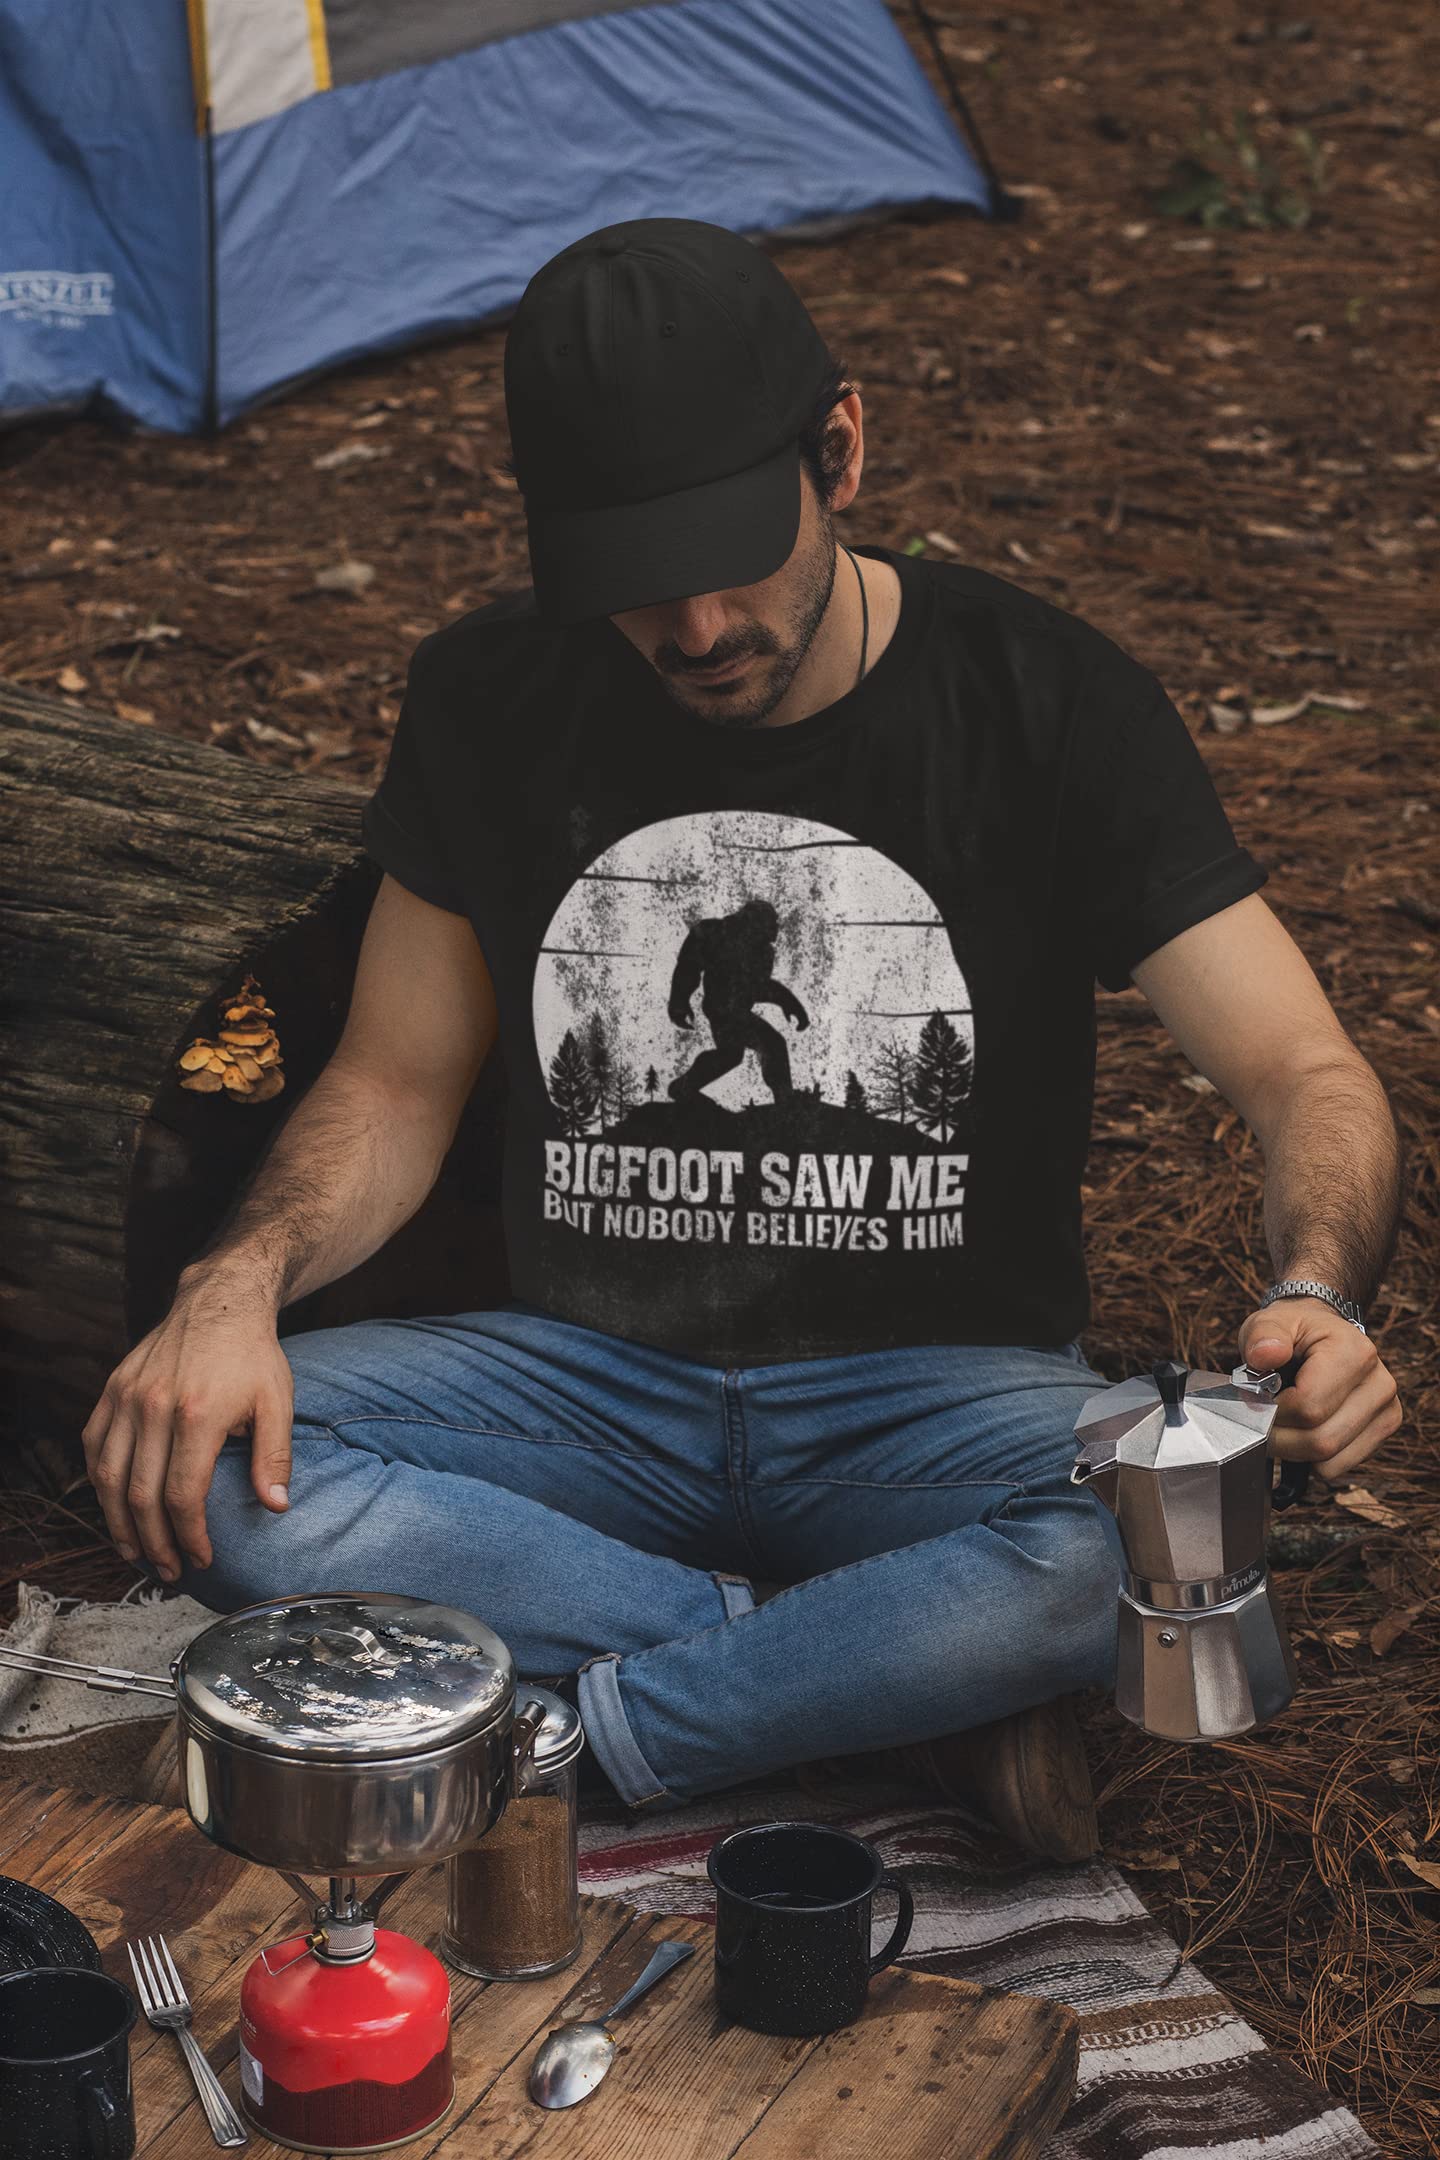 BROOKLYN VERTICAL Bigfoot Saw Me But Nobody Believes Him |Funny Sarcastic Adult Humor Short Sleeve Crew Neck Graphic T-Shirt